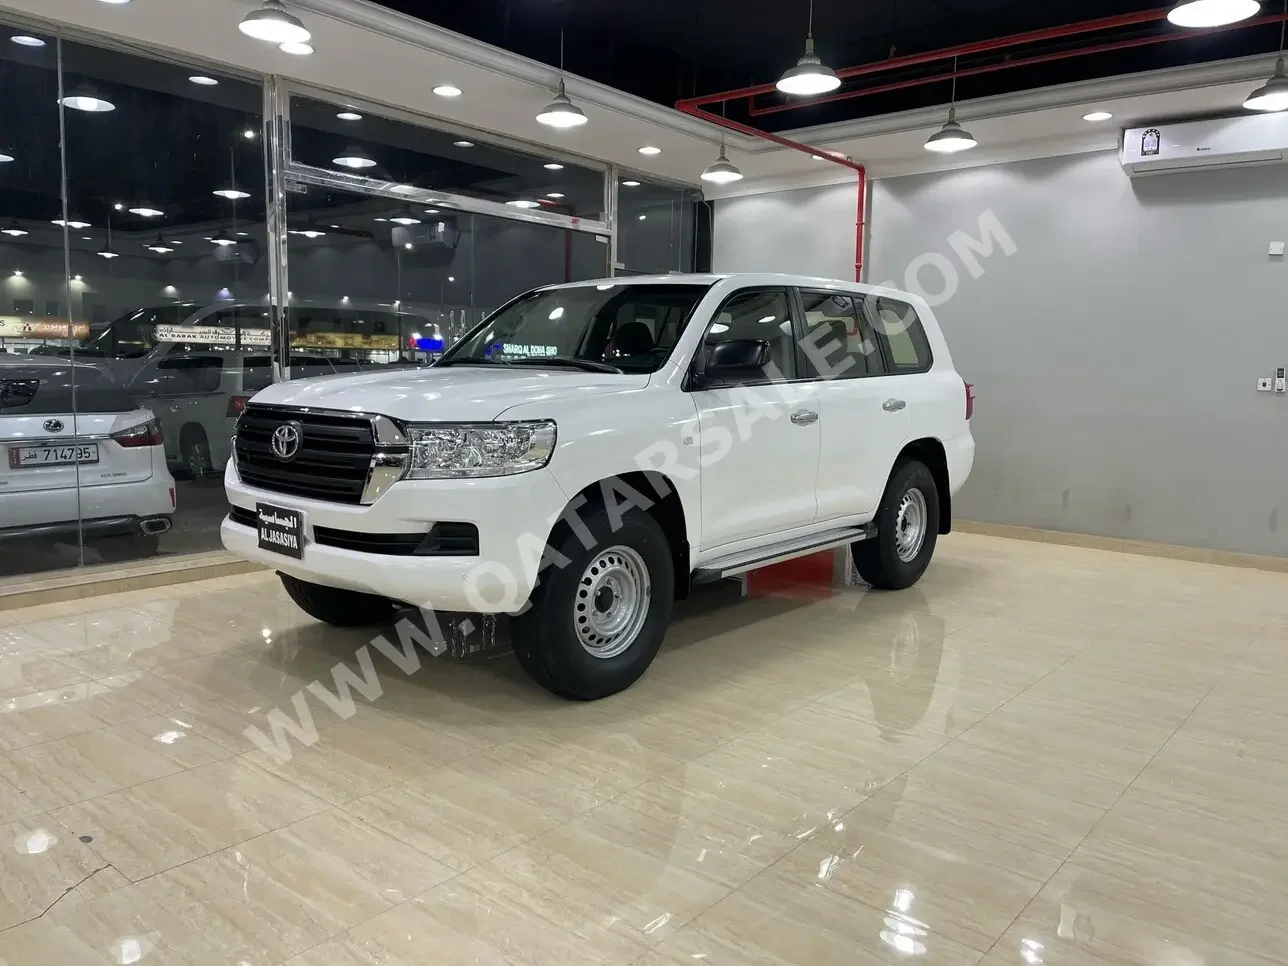 Toyota  Land Cruiser  G  2021  Automatic  94,000 Km  6 Cylinder  Four Wheel Drive (4WD)  SUV  White